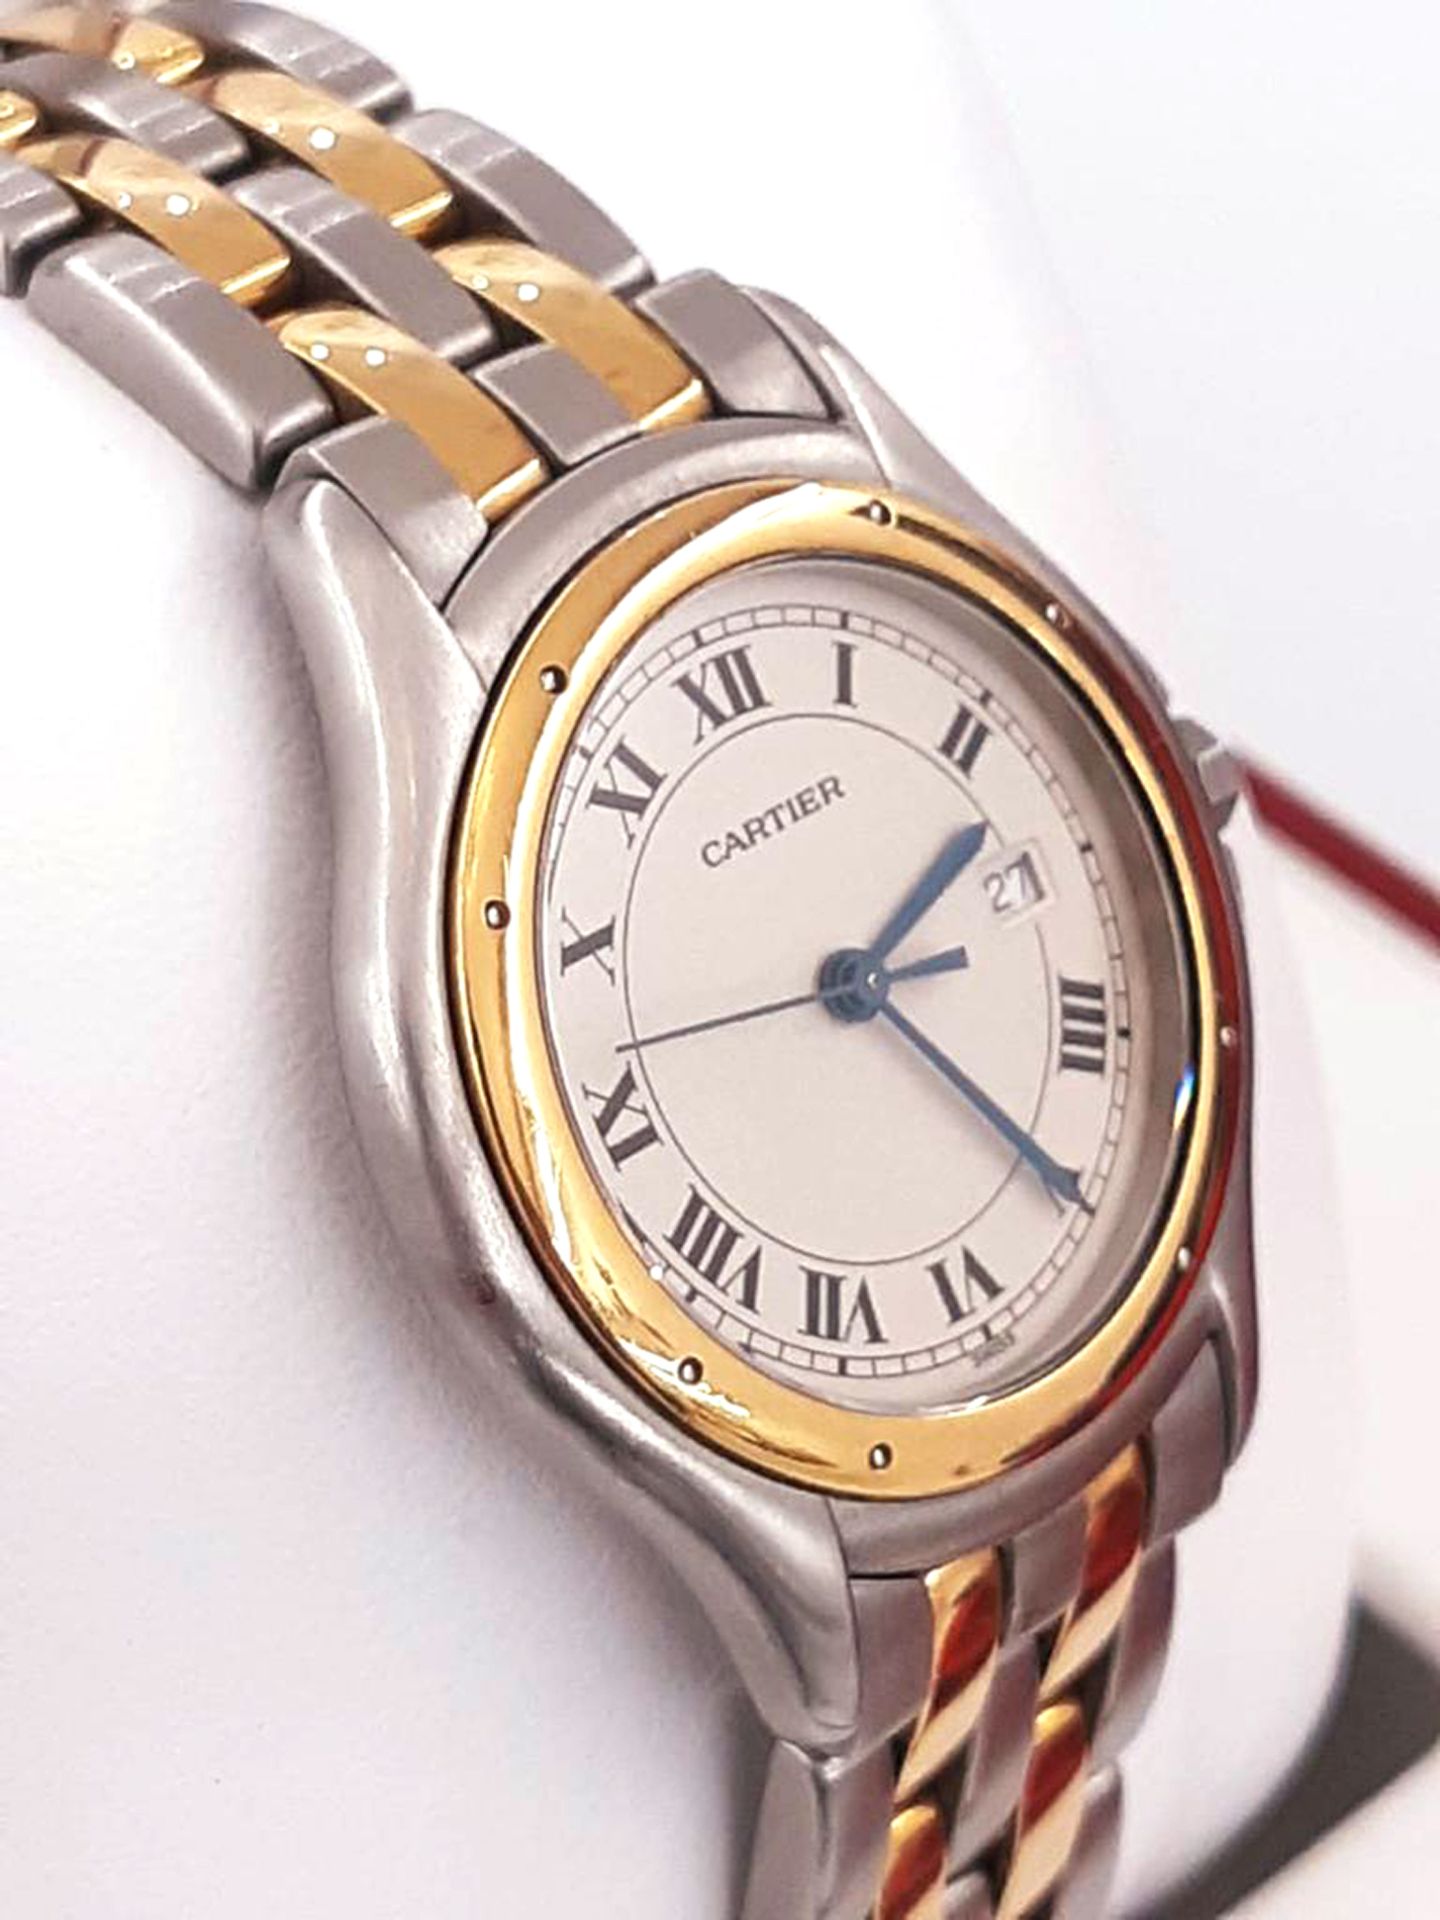 CARTIER COUGAR WATCH IN STEEL AND GOLD 33mm - Image 5 of 6